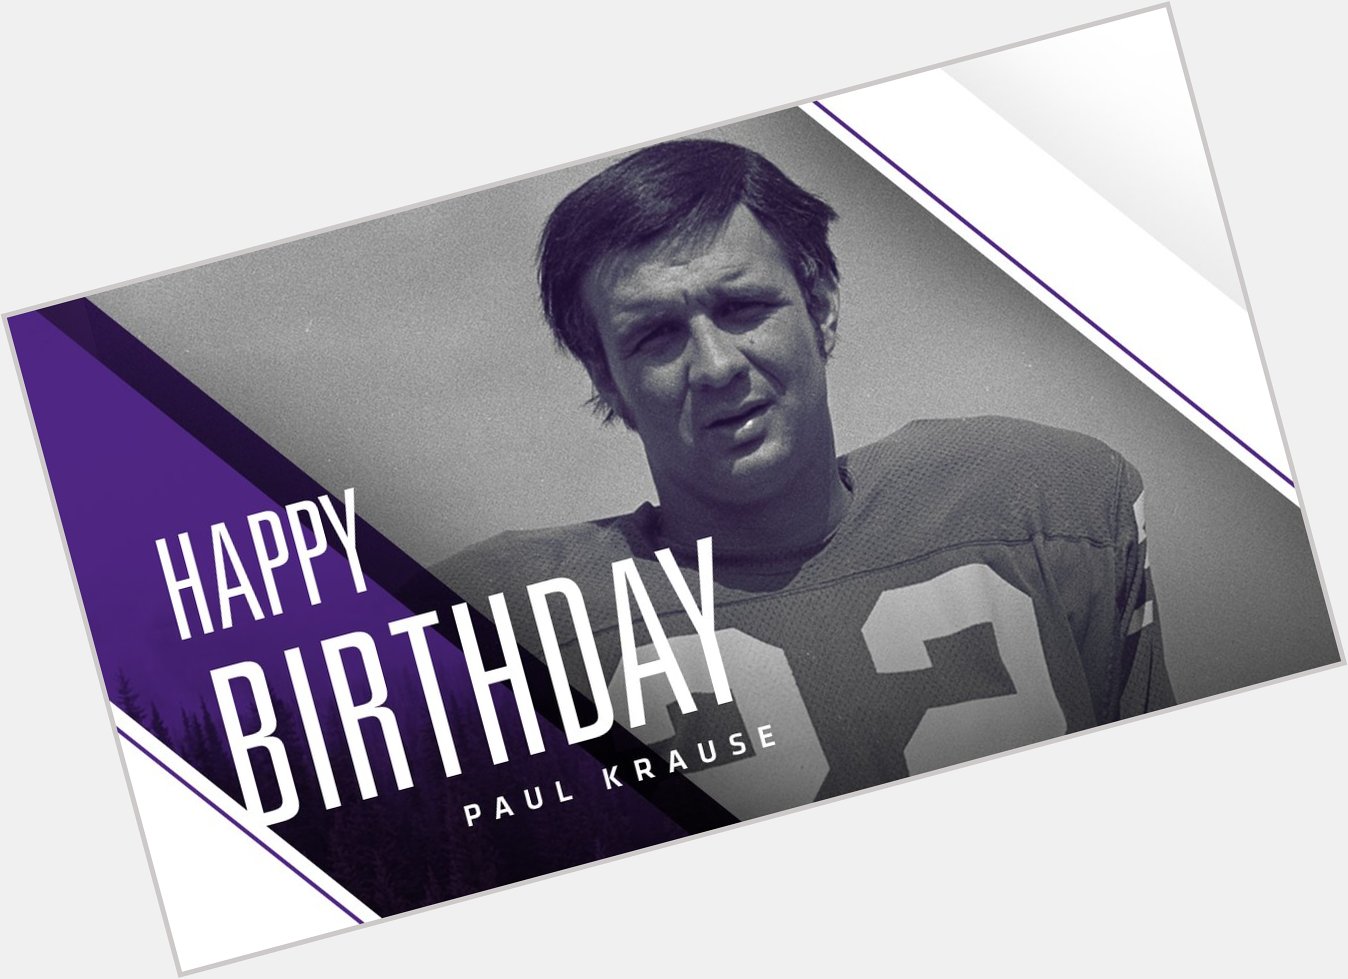 Happy birthday to Vikings legend and the all-time leader in interceptions - Paul Krause! 